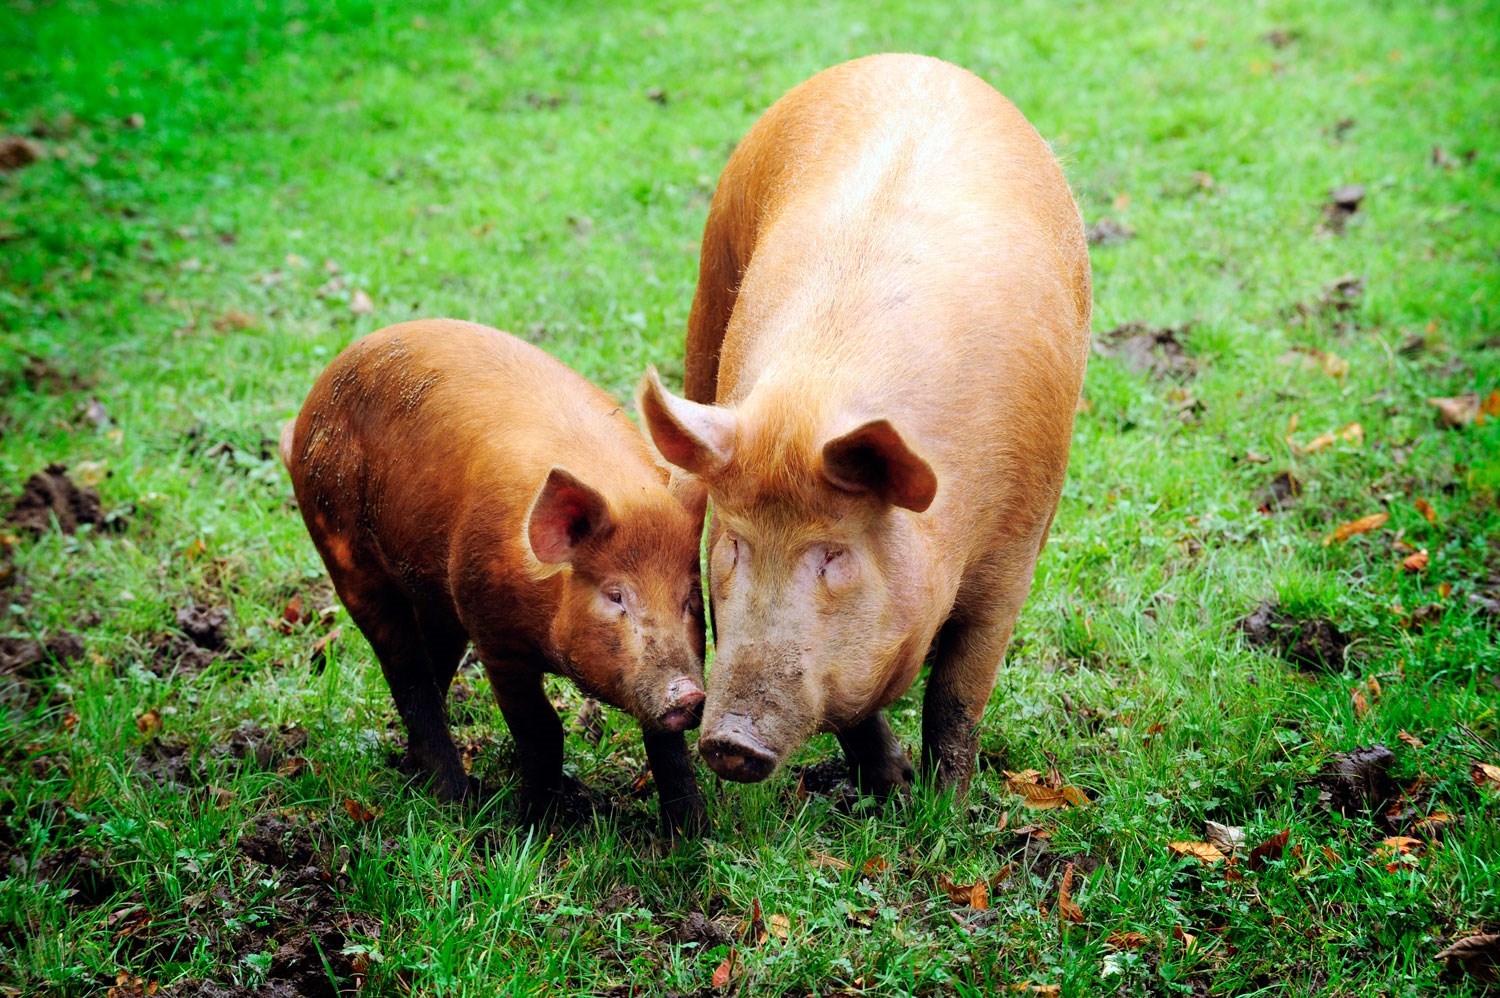 Two Tamworth pigs in a grassy field at the National Museum of Rural Life. 